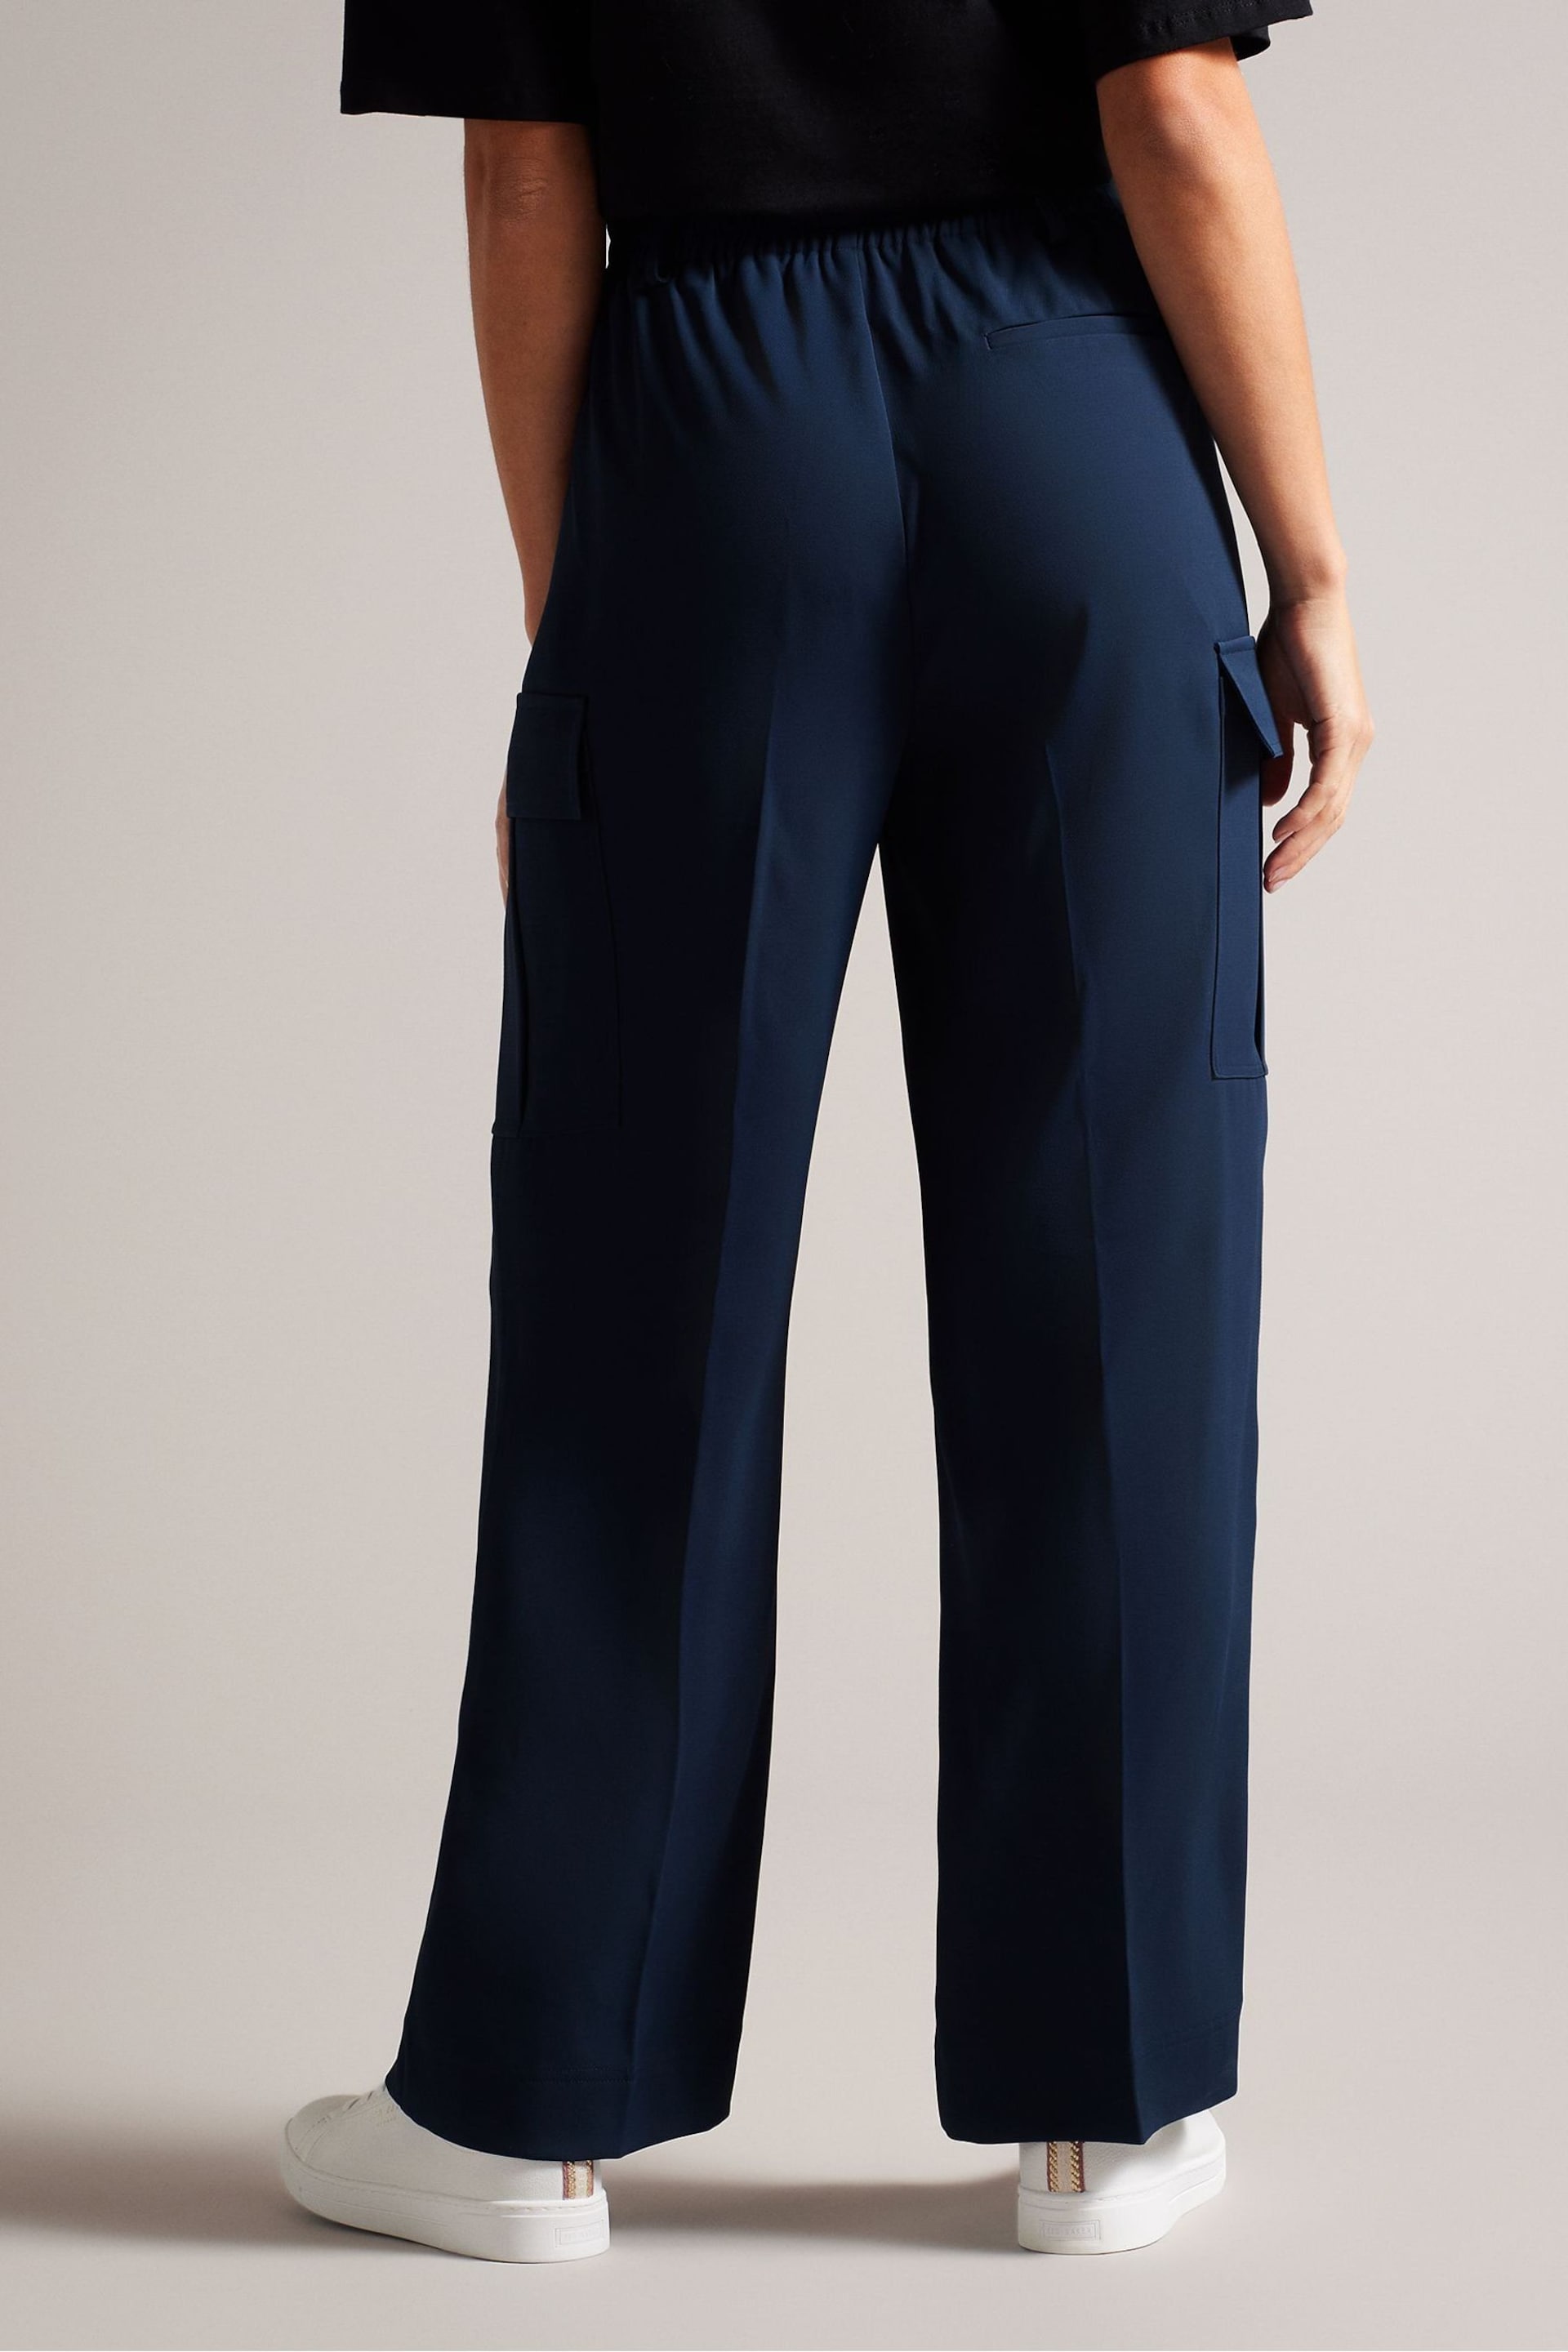 Ted Baker Blue Roccio High Waisted Wide Leg Cargo Trousers - Image 2 of 5